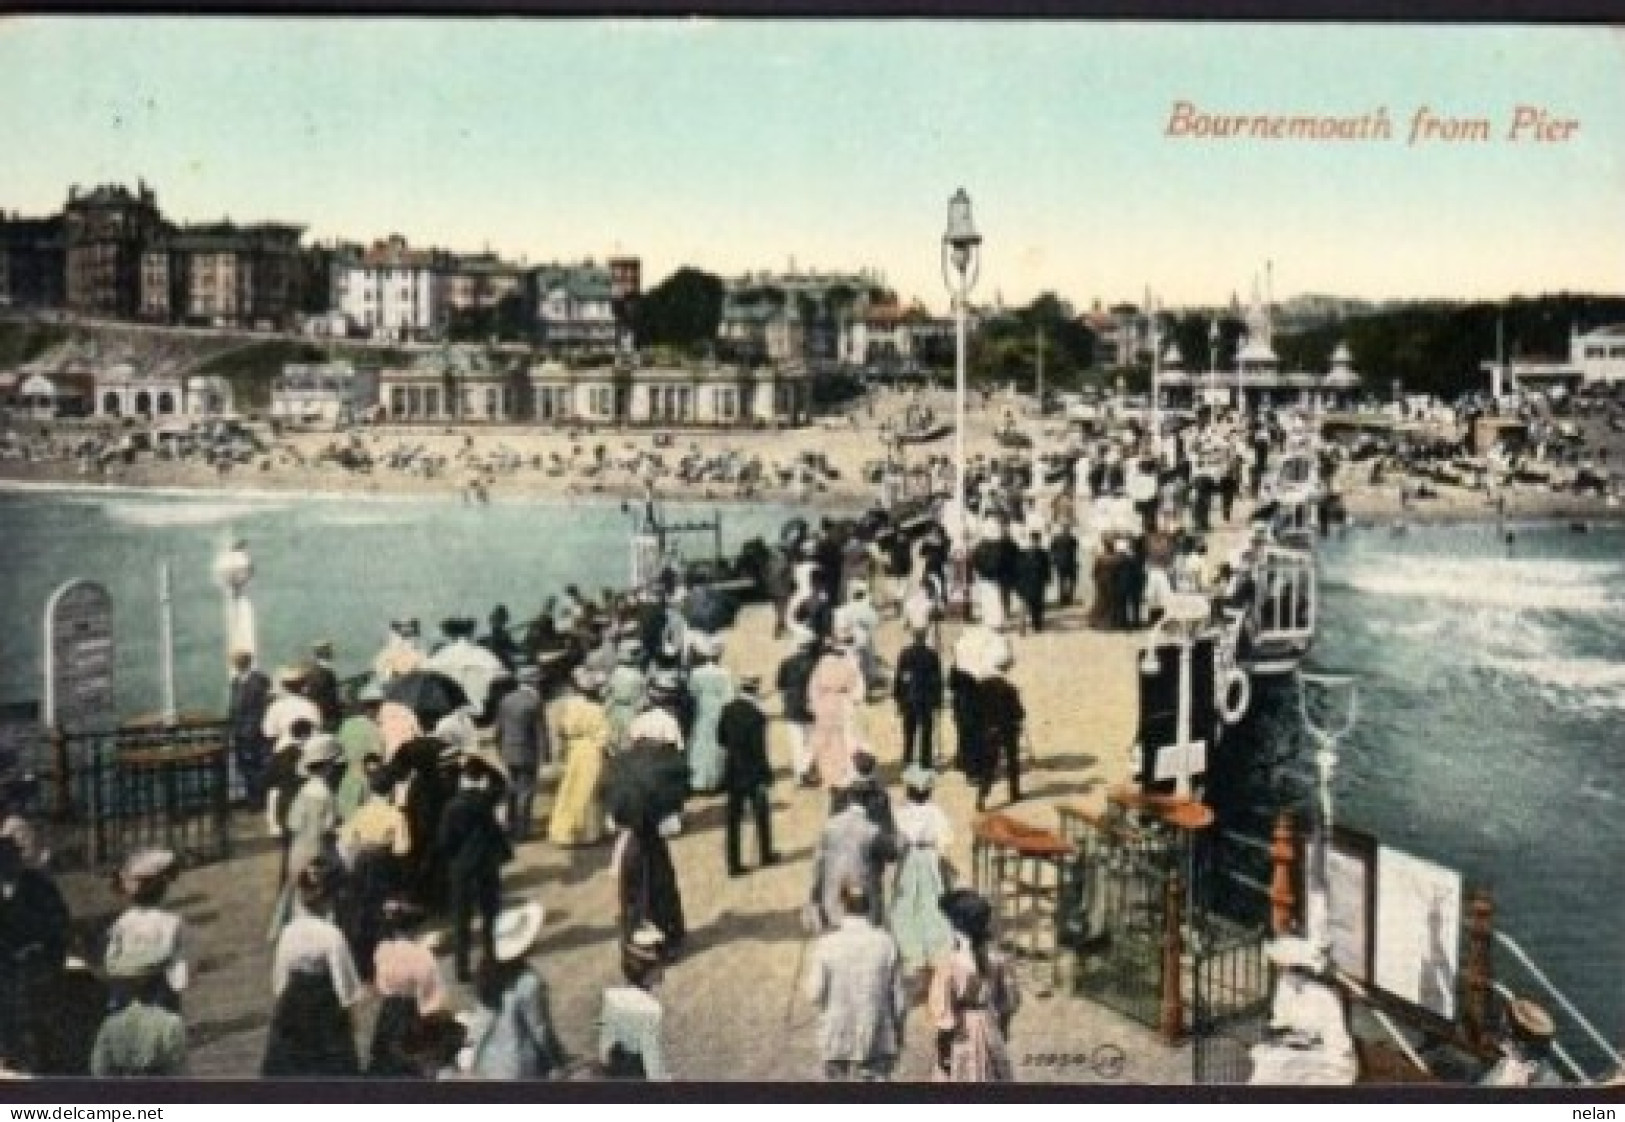 BOURNEMOUTH FROM PIER - Bournemouth (until 1972)